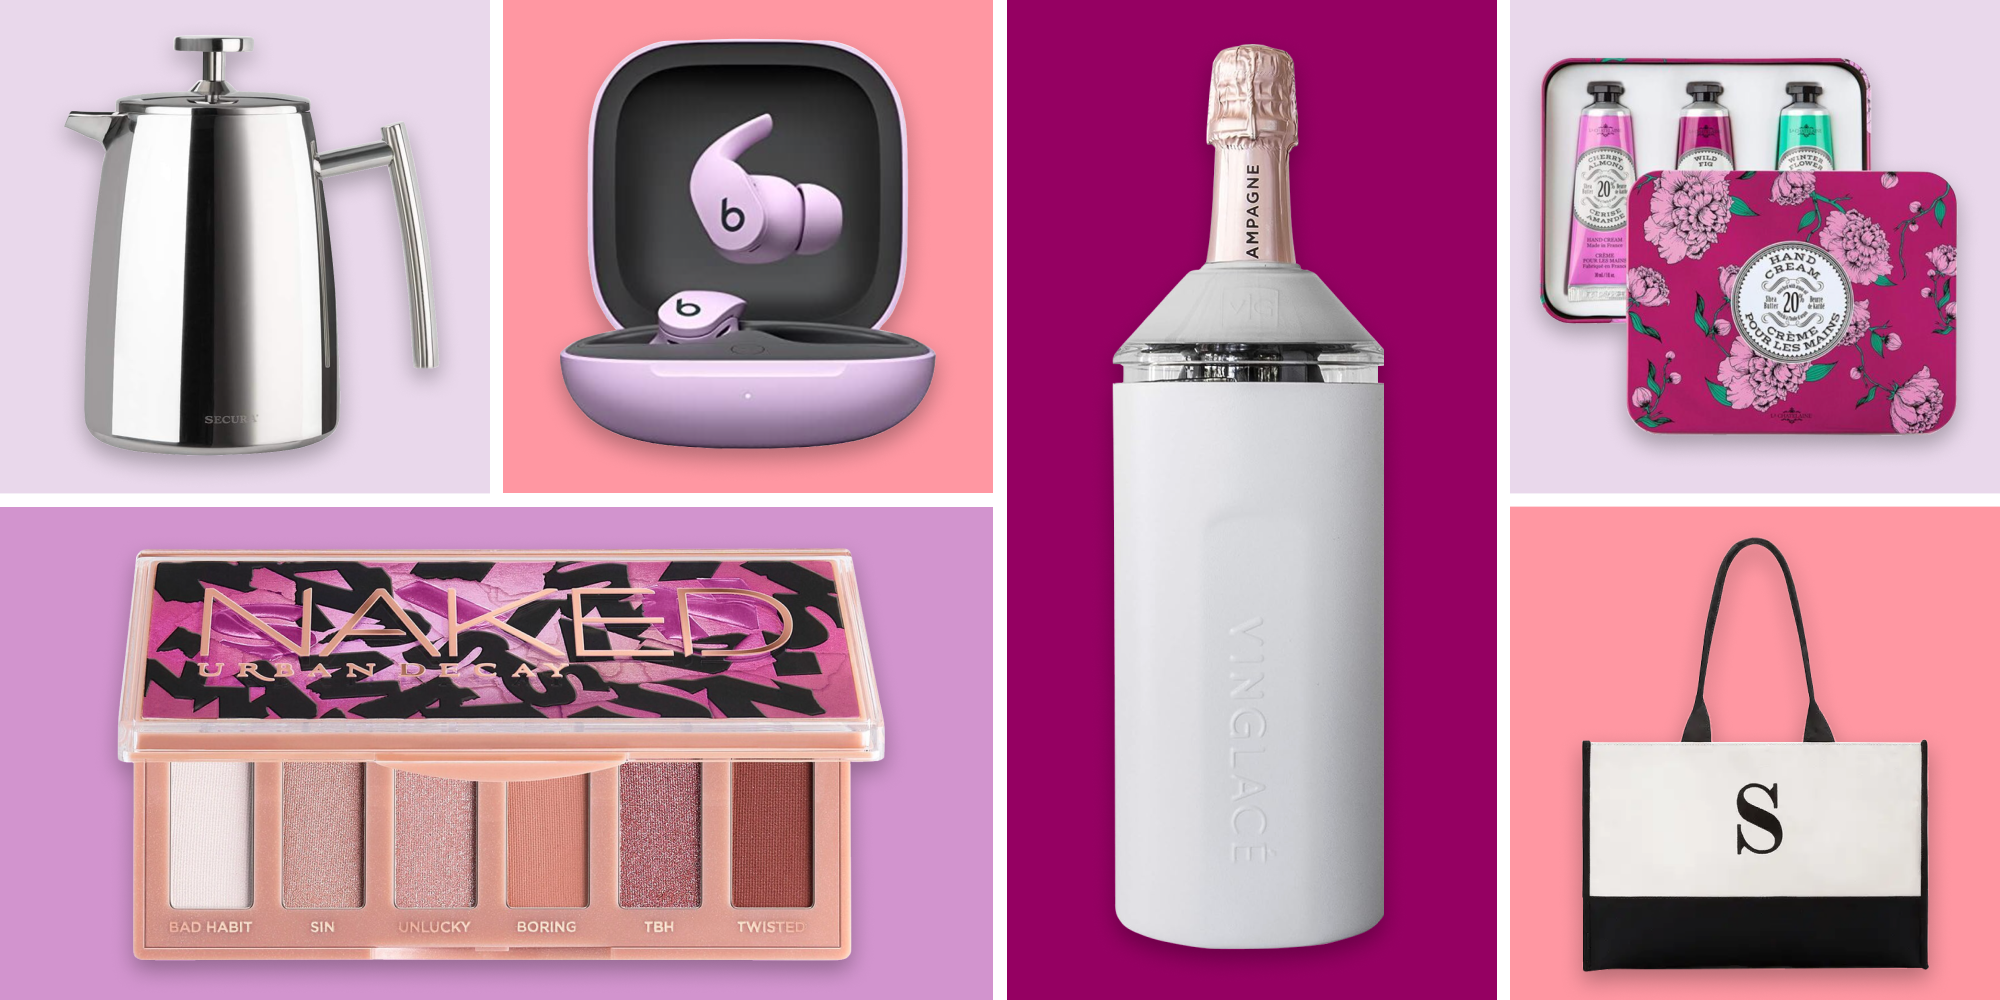 The Best Gifts for Women In 2023 - Gifts for Every Woman